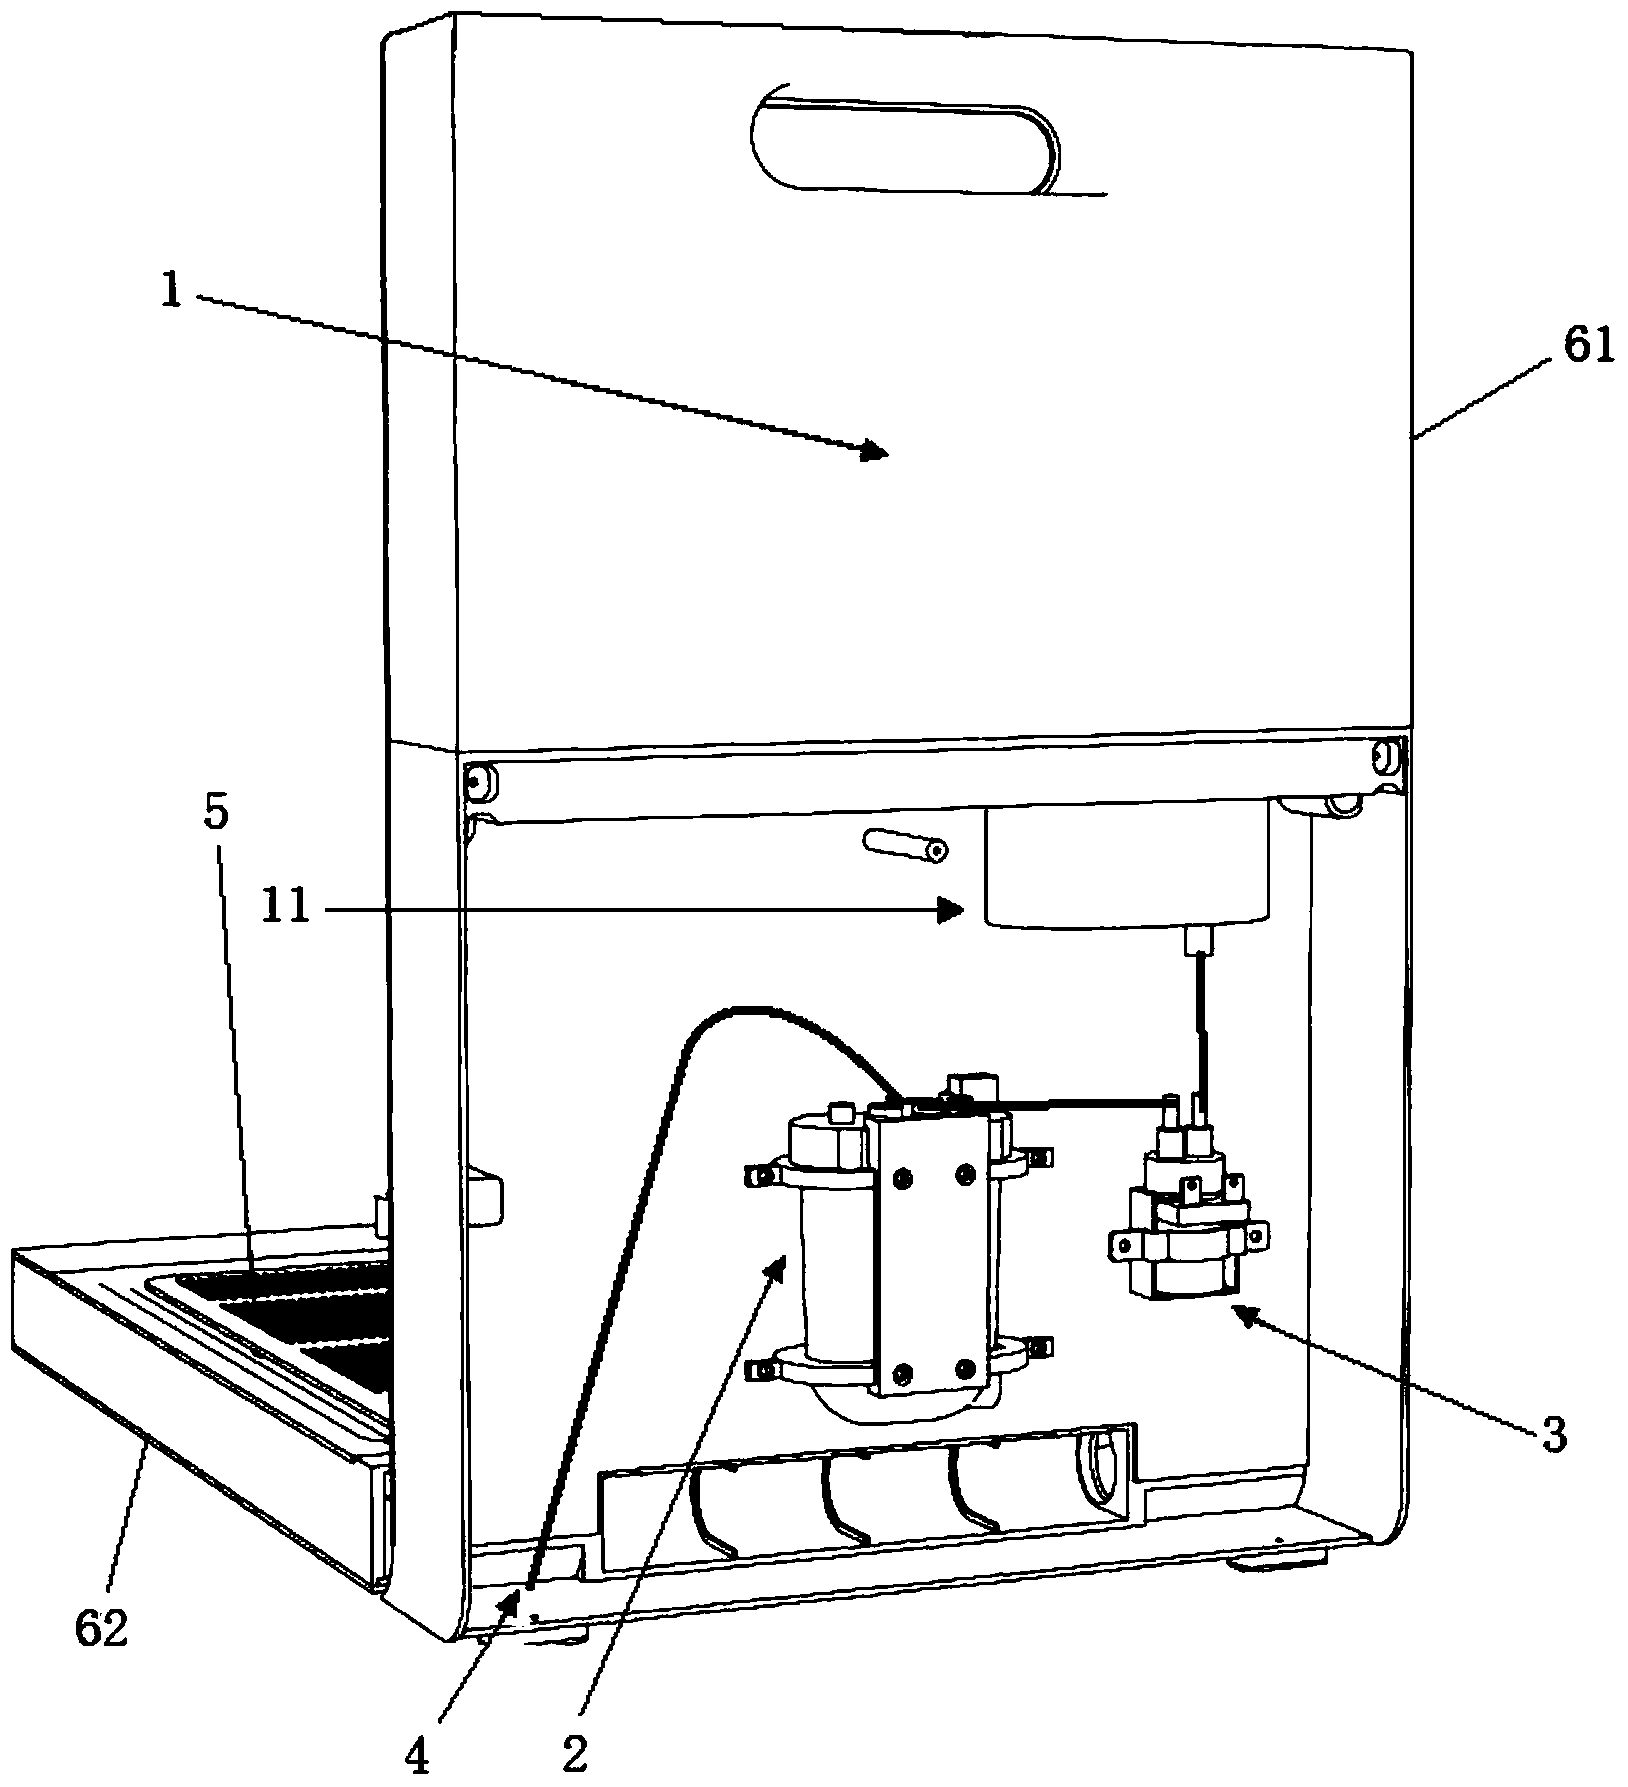 Electric steaming device